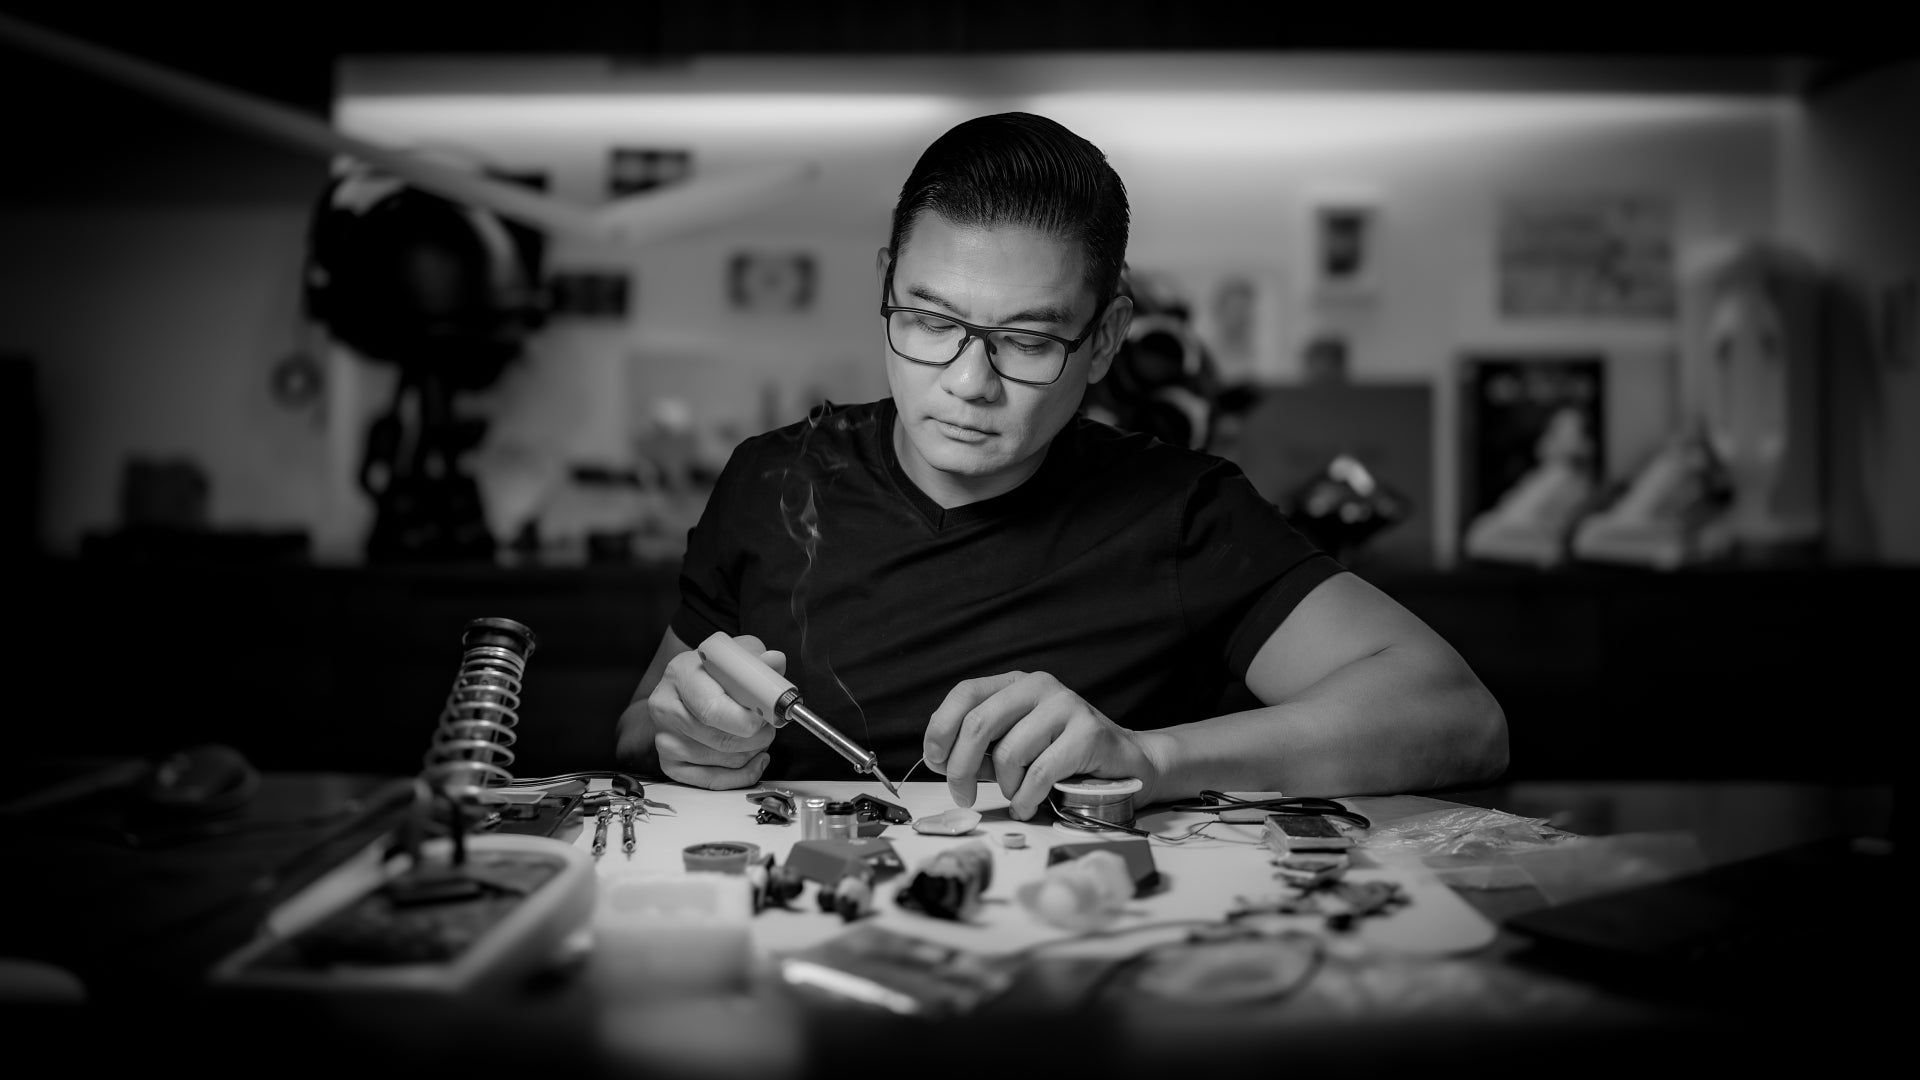 David Leung CEO at SAN Sound working on his headphone creations at his desk